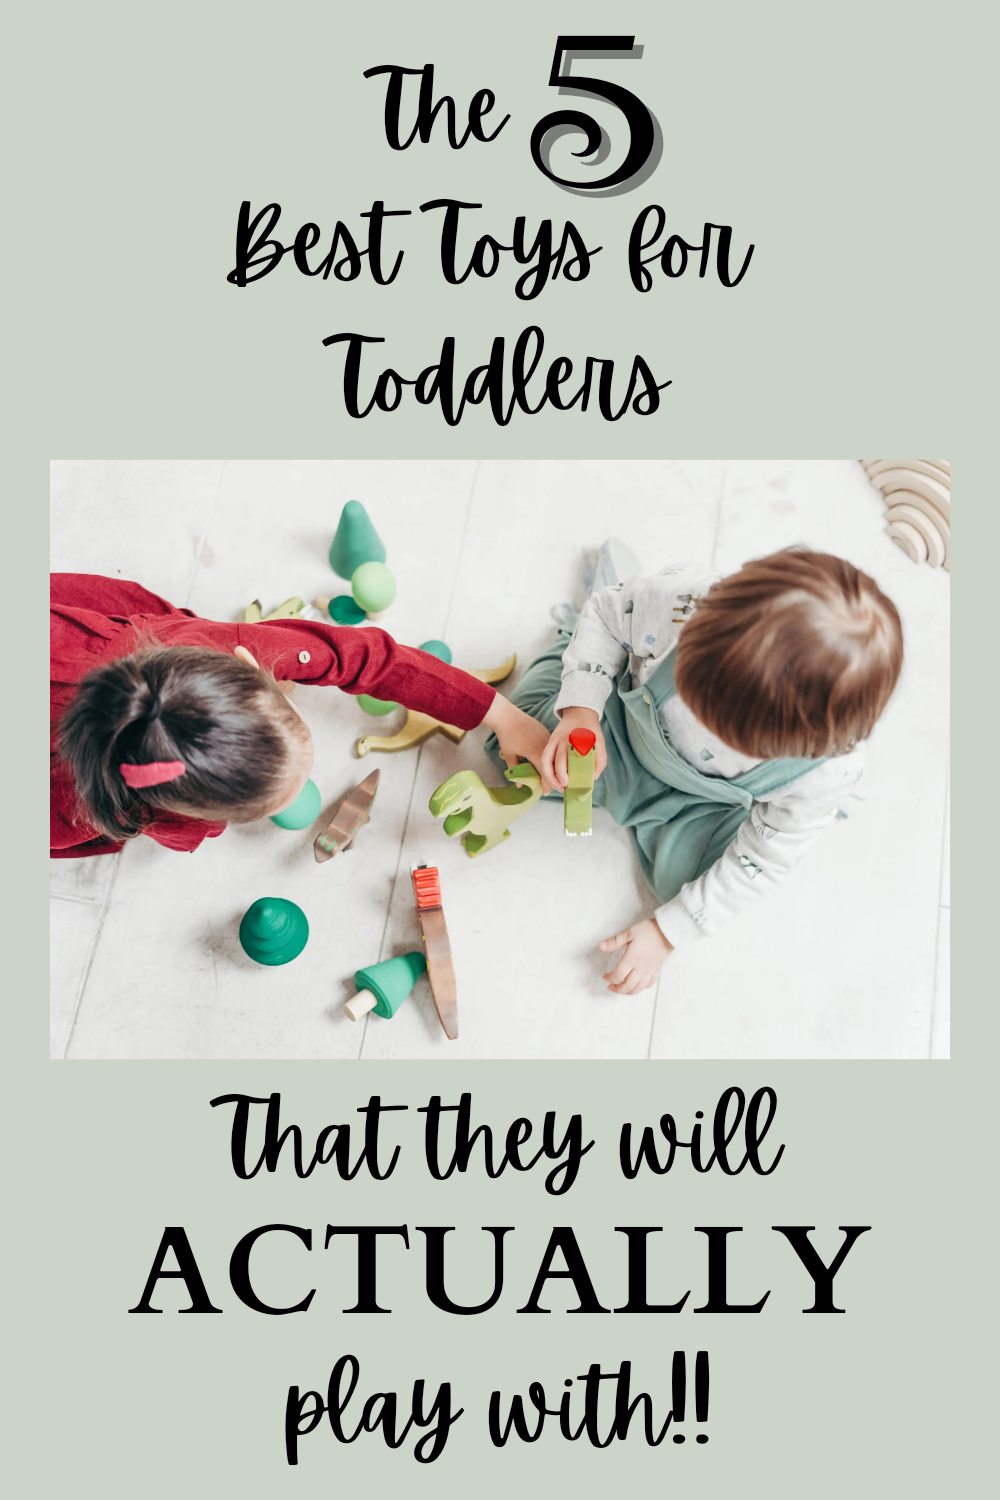 The 5 Best Toys for Toddlers, That They Will ACTUALLY Play With!